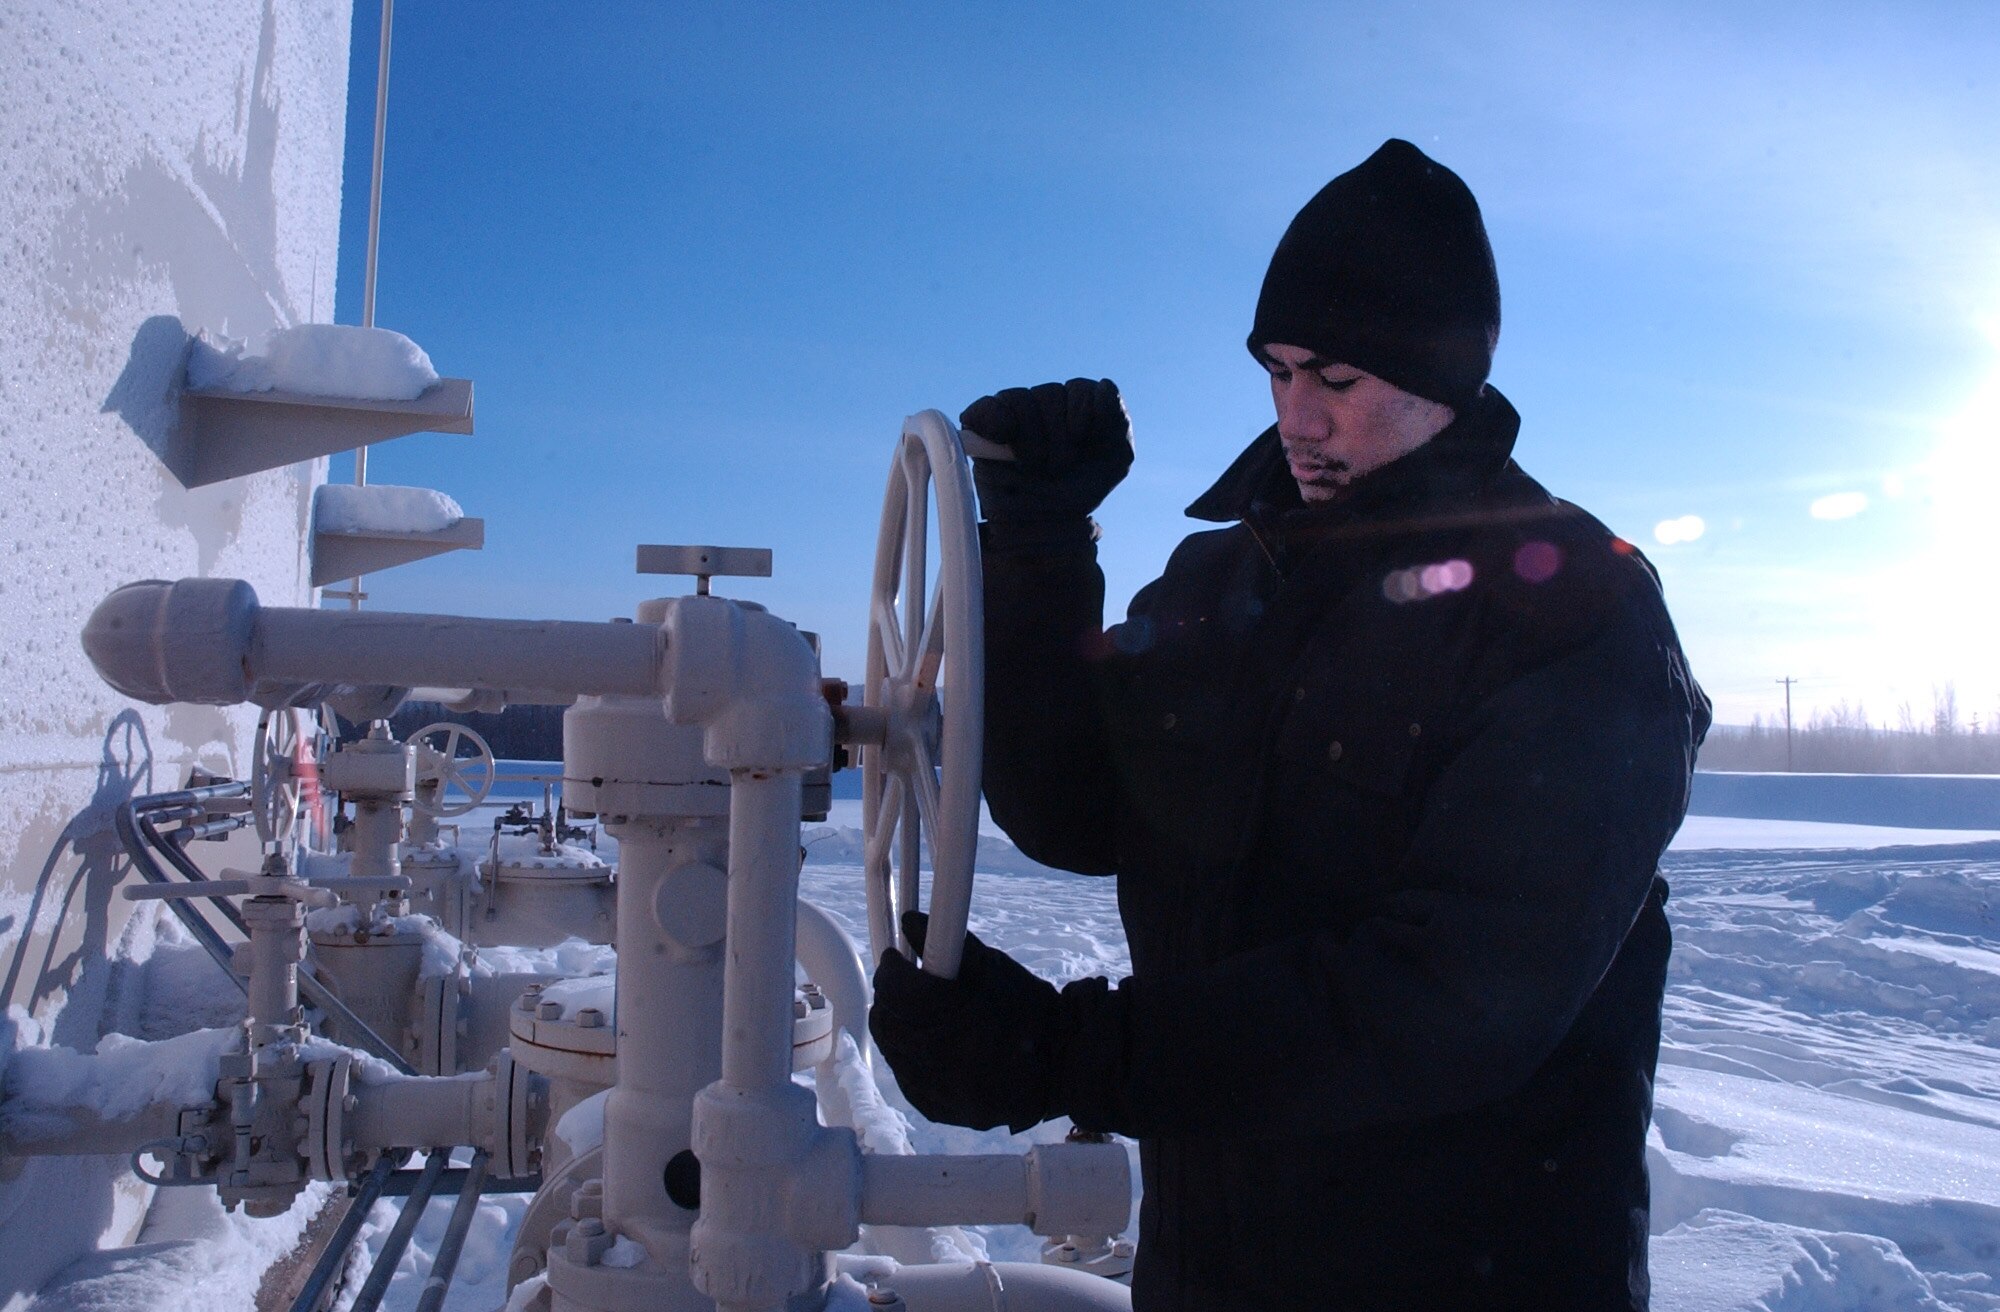 EIELSON AIR FORCE, Alaska -- Airman 1st Class Jeremiah Ulu, 354th Logistics Squadron facilities operator, inspects a fuels valve for leaks and ease of operation. Fighting temperatures as low as minus 60, Airman Ulu performs daily checks on each bulk fuels storage tank. (U.S. Air Force photo by Senior Airman Justin Weaver)  